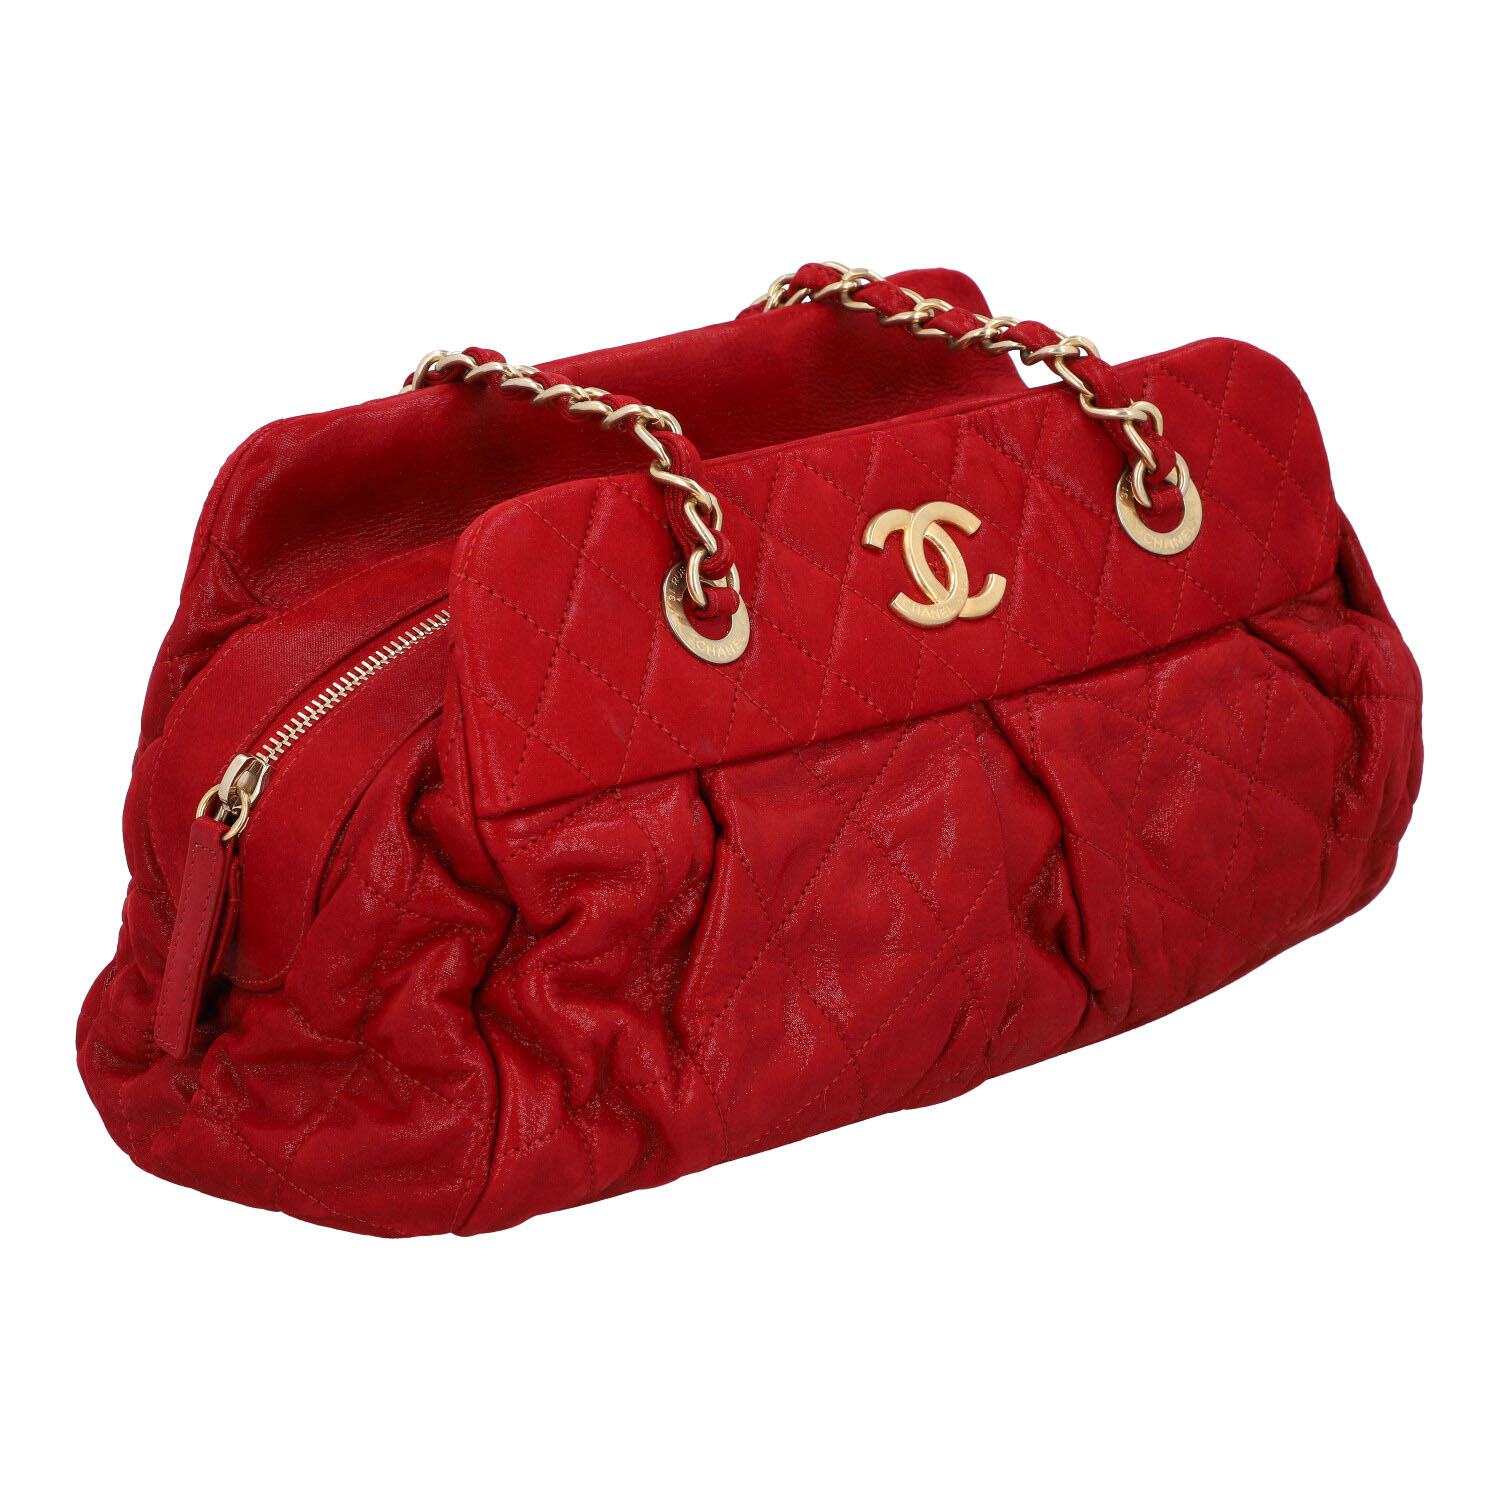 CHANEL Schultertasche, Koll. 2011. - Image 2 of 9